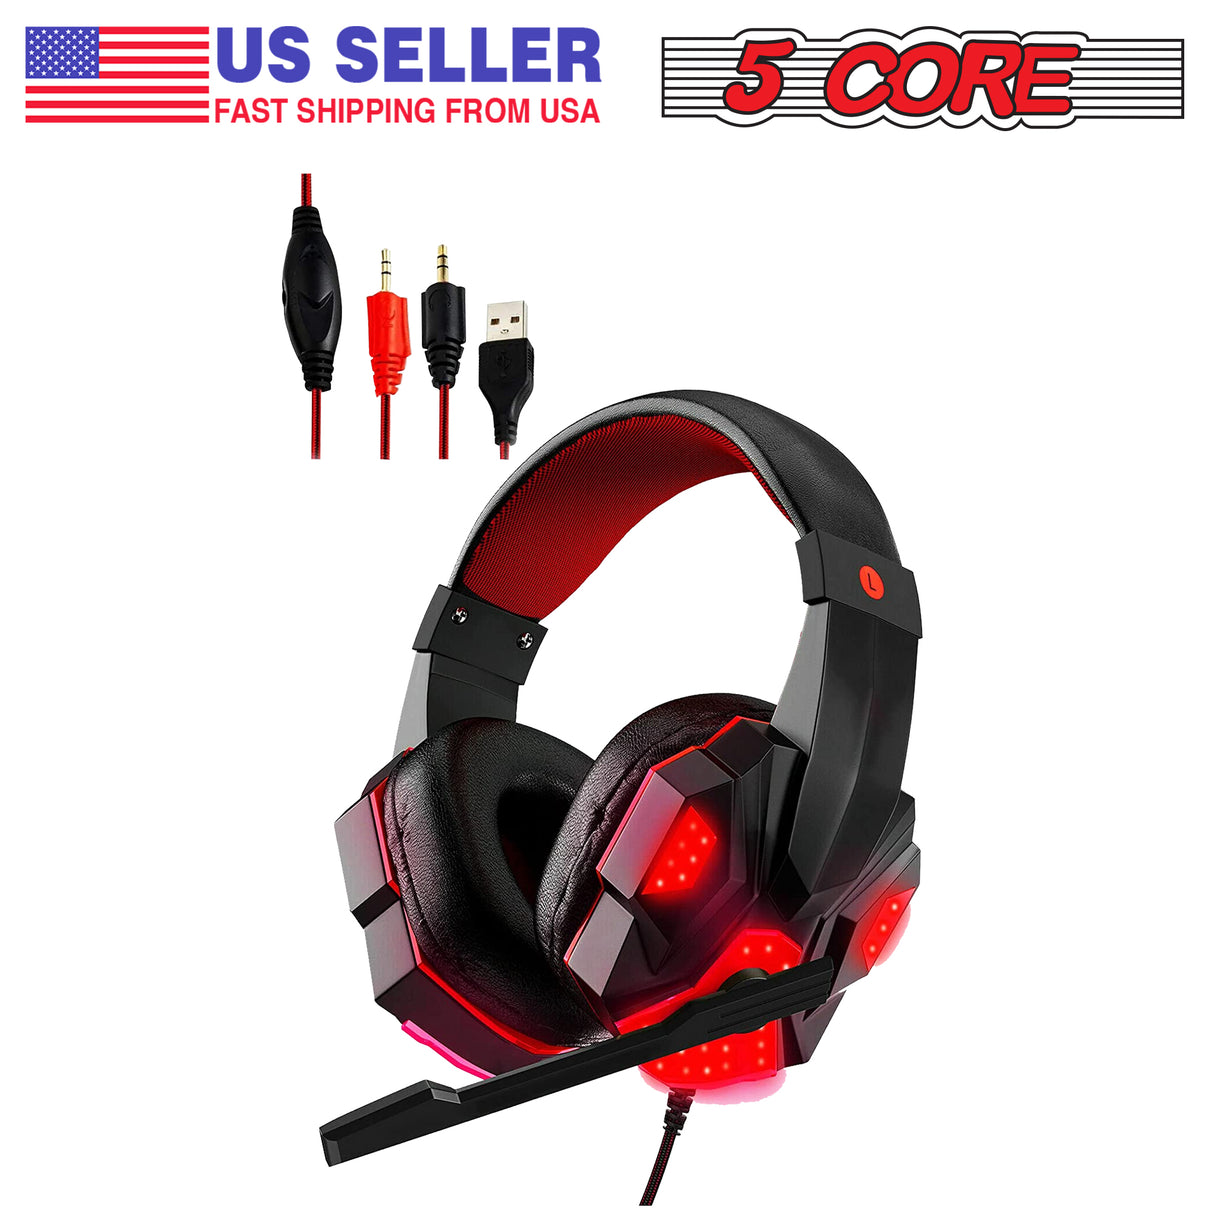 5 CORE 2Pcs Gaming Headset for PS4 PC One PS5 Console Controller, Noise Cancelling Microphone Over Ear Stereo Headphones with Mic, LED Light, Bass Surround, Earmuffs for Laptop Mac NES Games Red & Blue HDP GM1 R+B